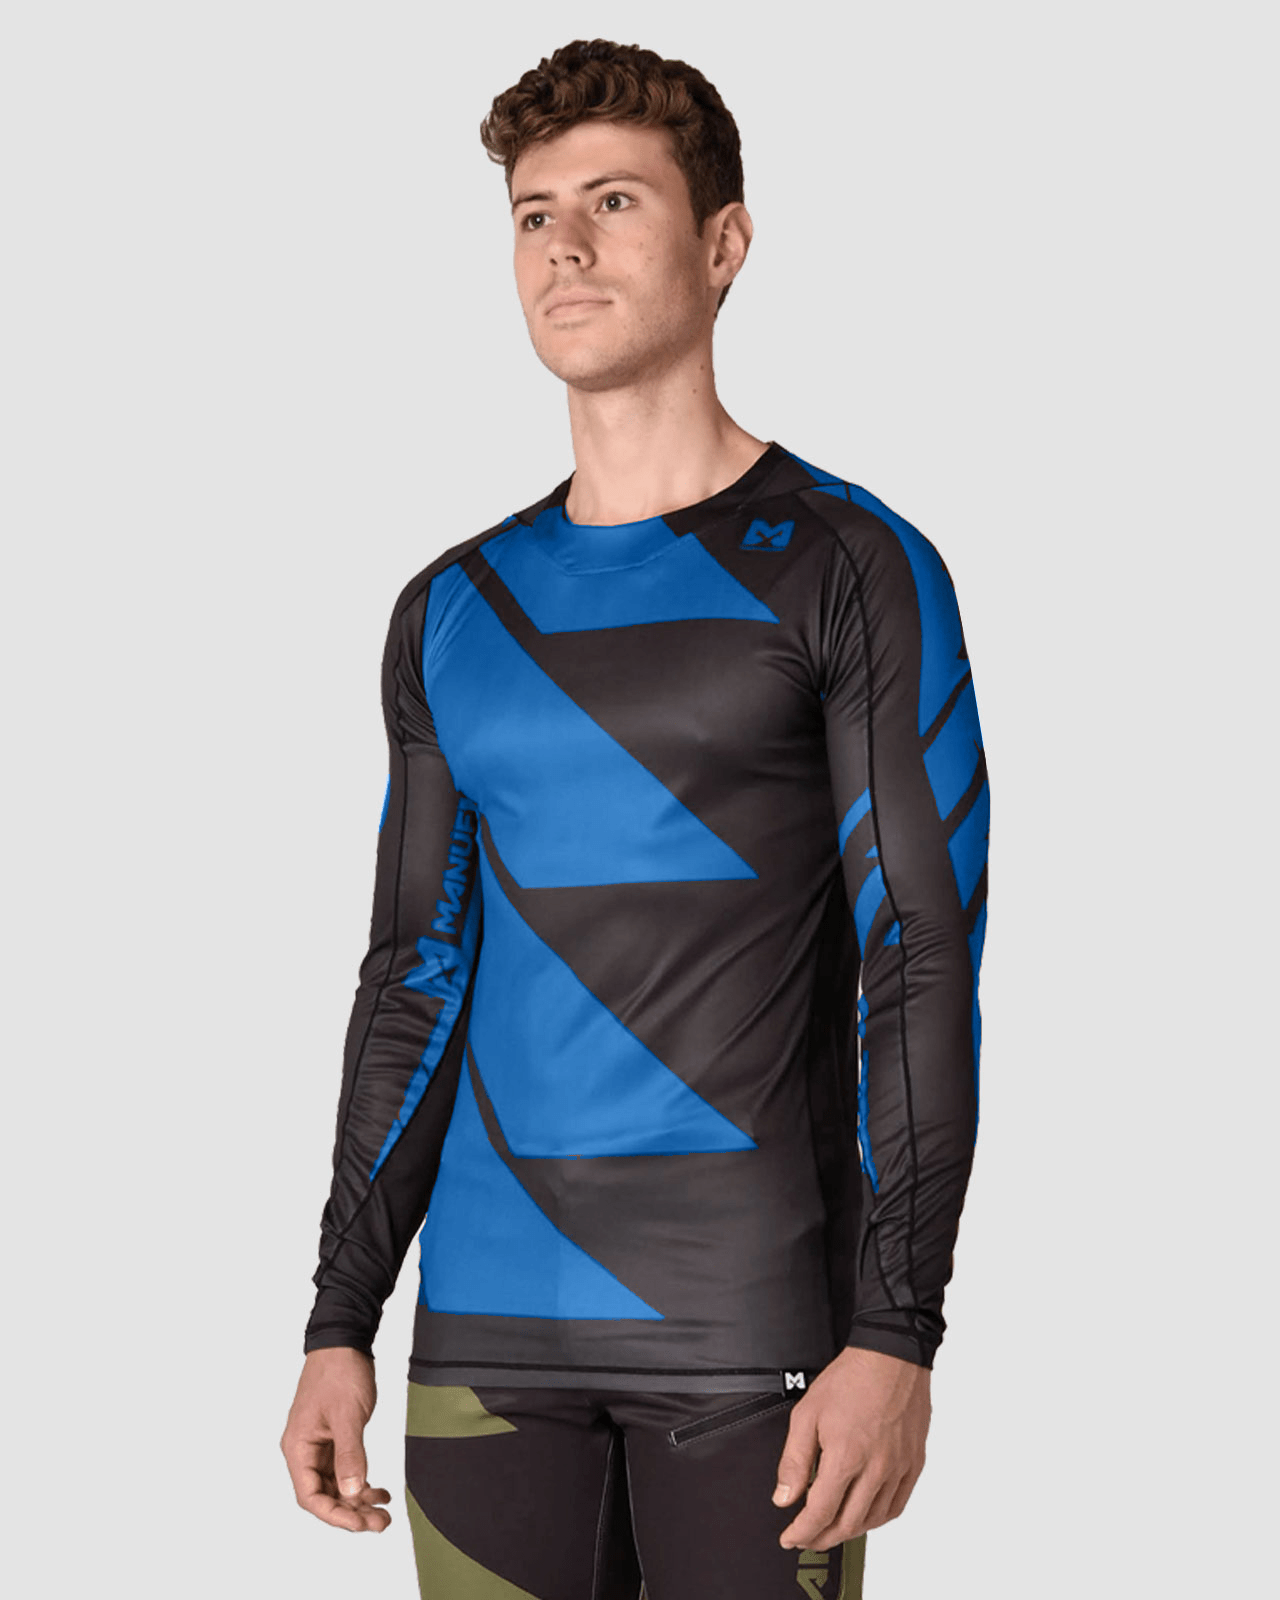 Manufactory Apparel Physical product Electrix Streamline Jersey